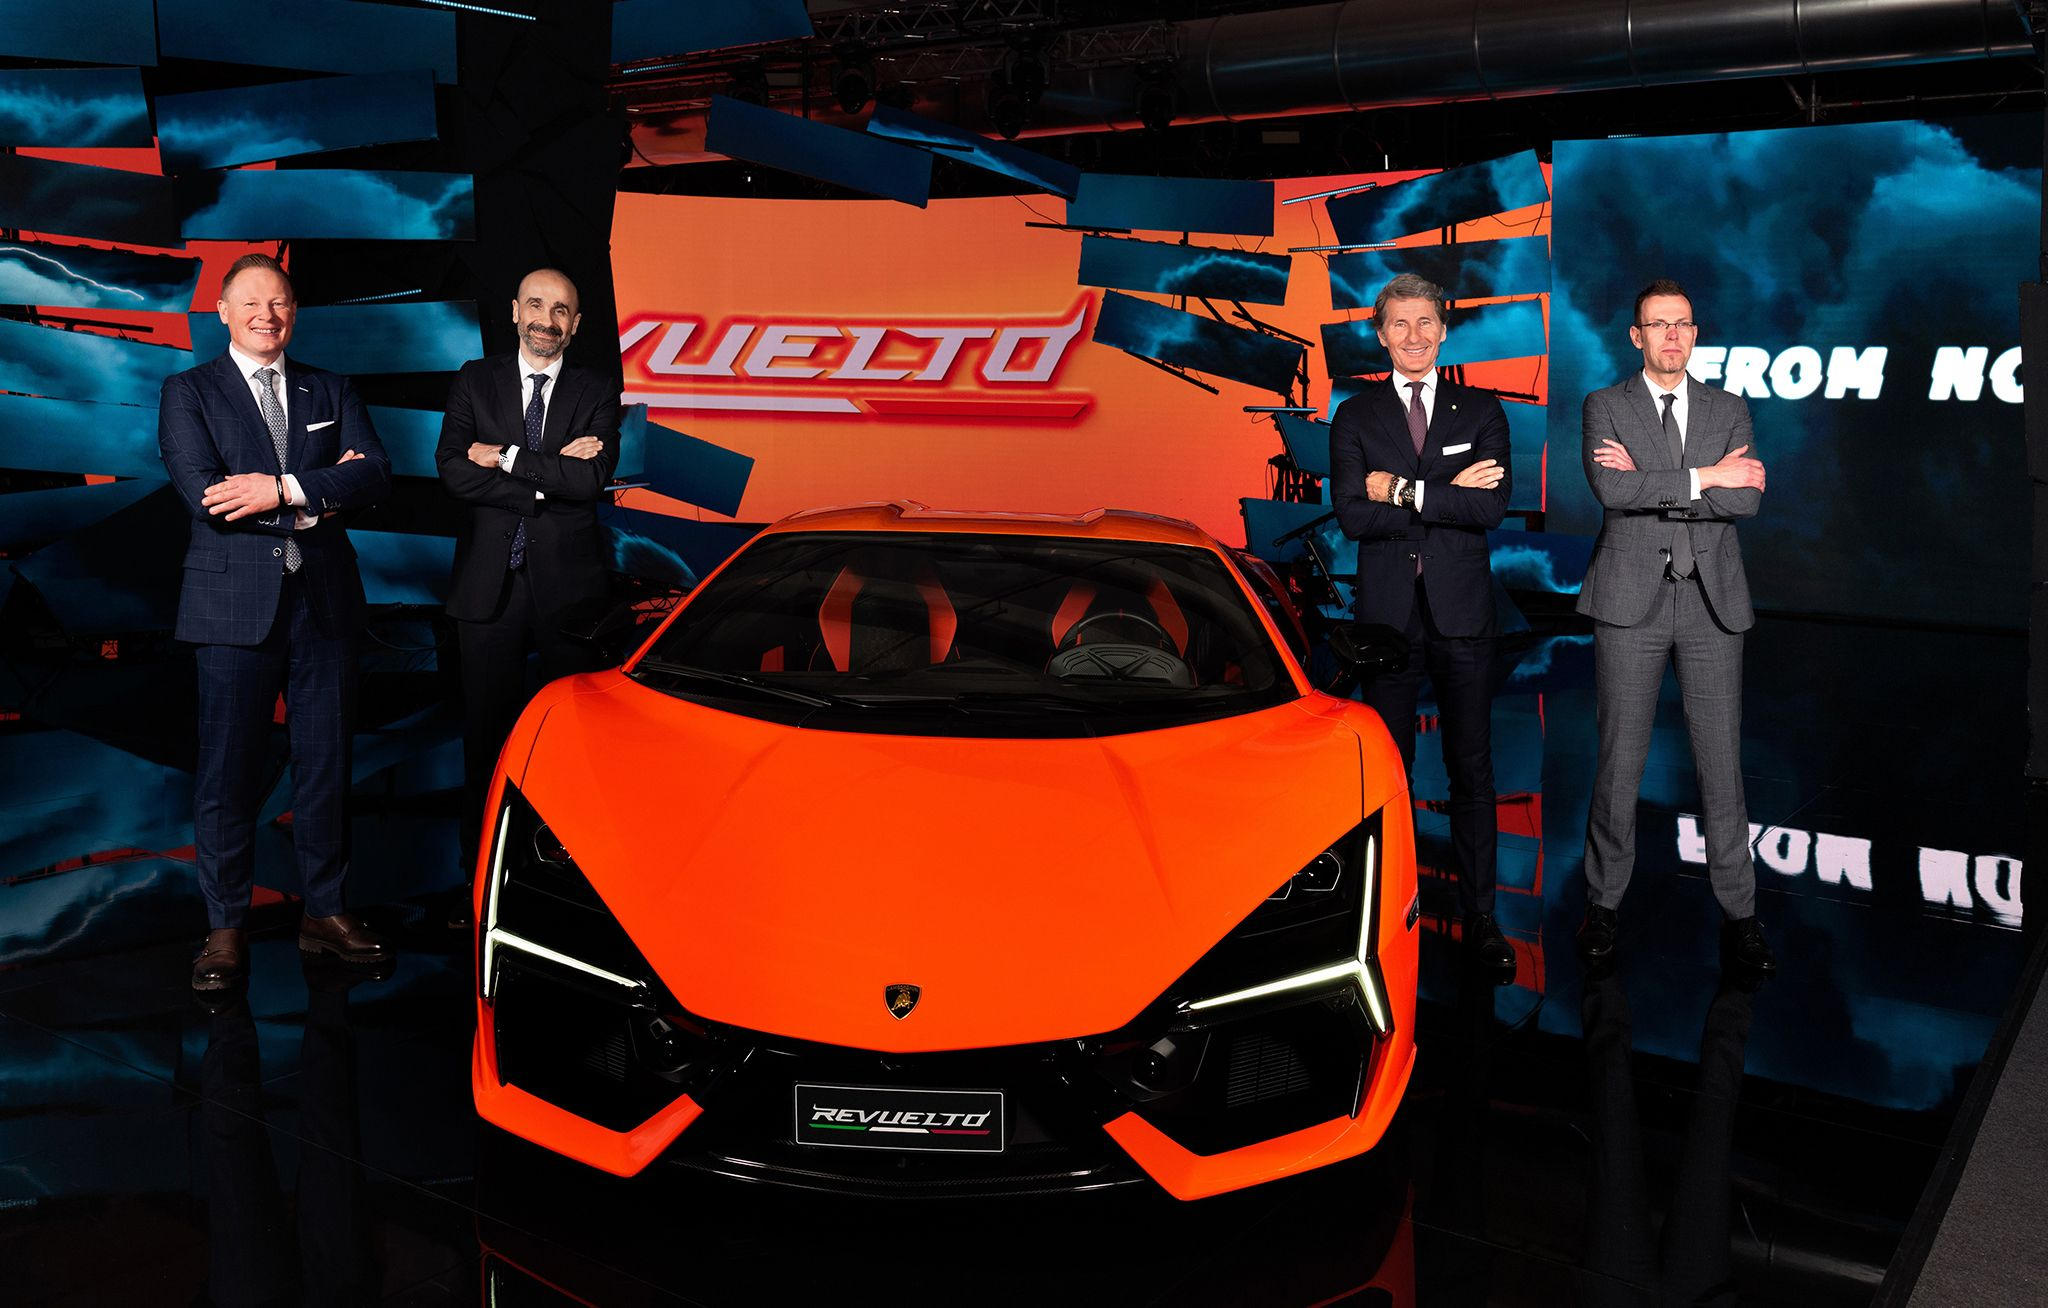 Lamborghini - The first super sports V12 hybrid HPEV, unveiled to media, owners and celebrities 